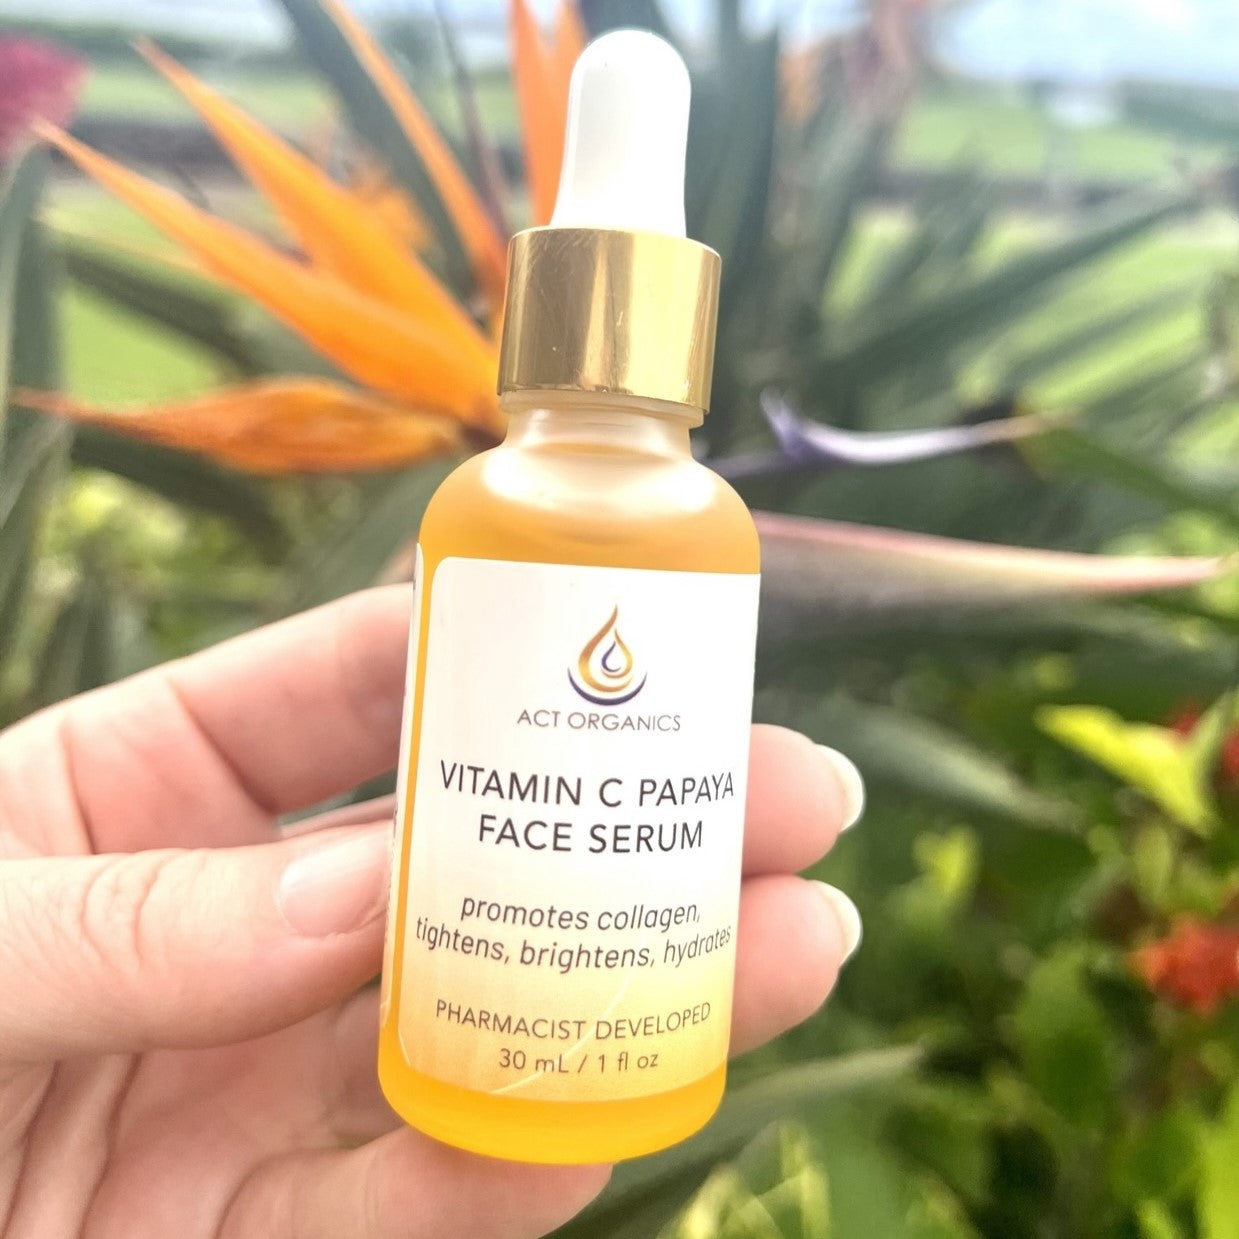 Vitamin C Serum. Great for Wrinkles and Fine Lines- ACT ORGANICS.